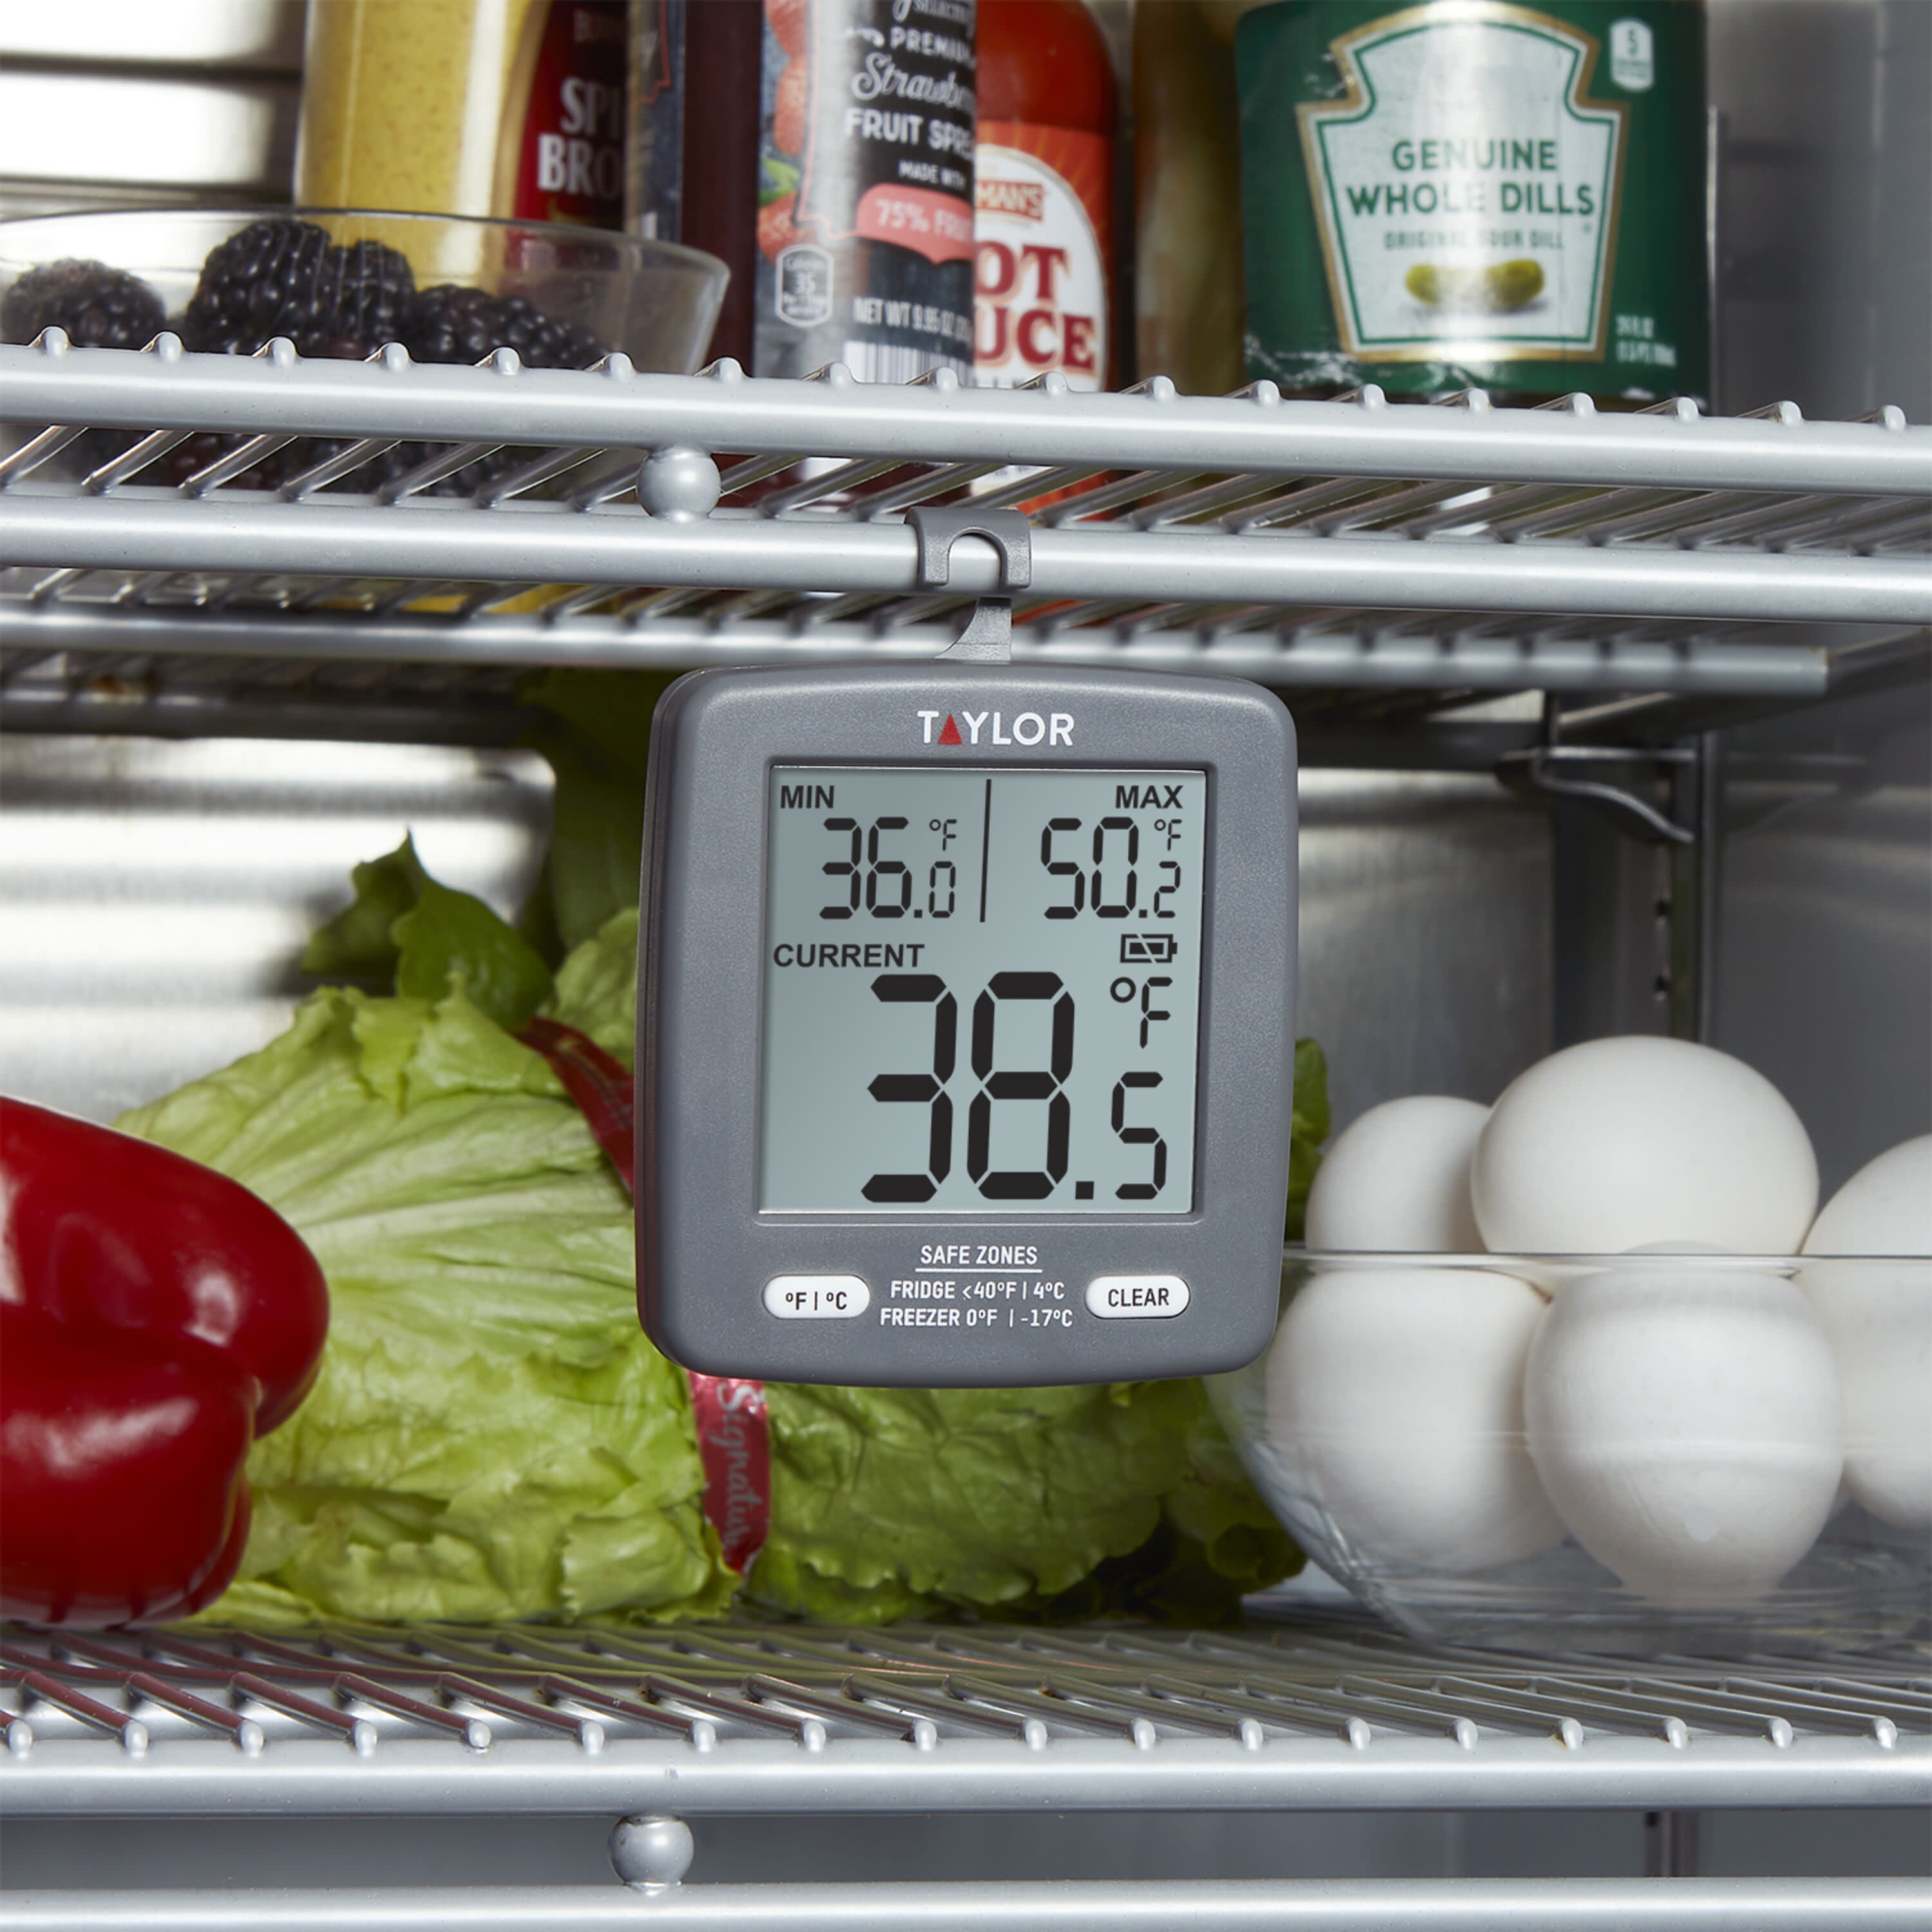 Taylor 5924 Refrigerator Thermometer, 3-1/4 x 3-3/4, Stainless Steel